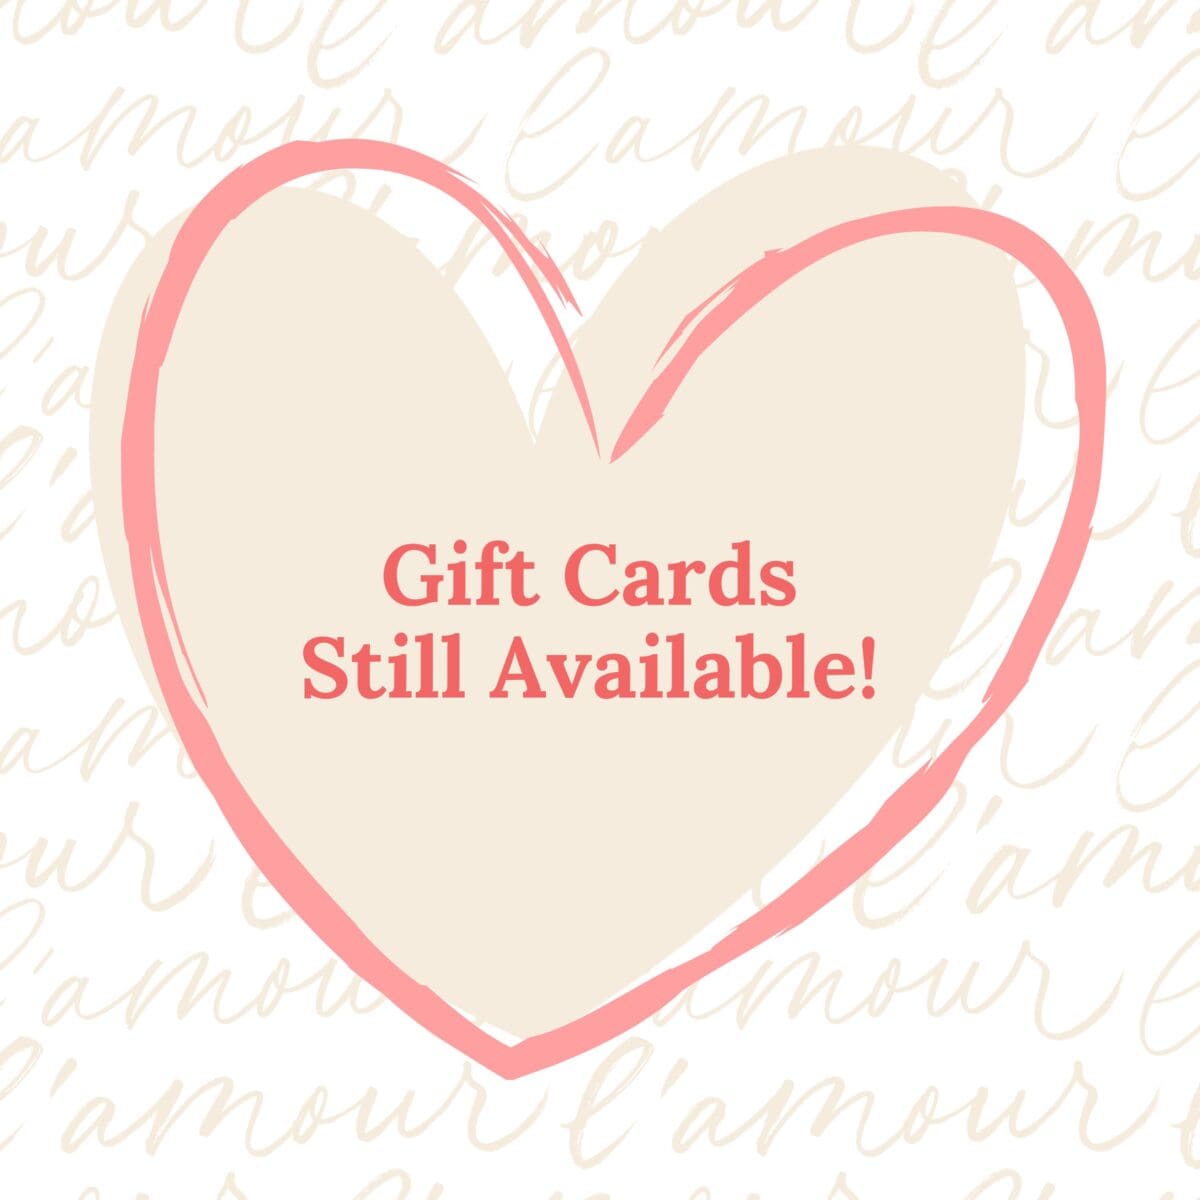 Gifts Cards Still Available Vday post